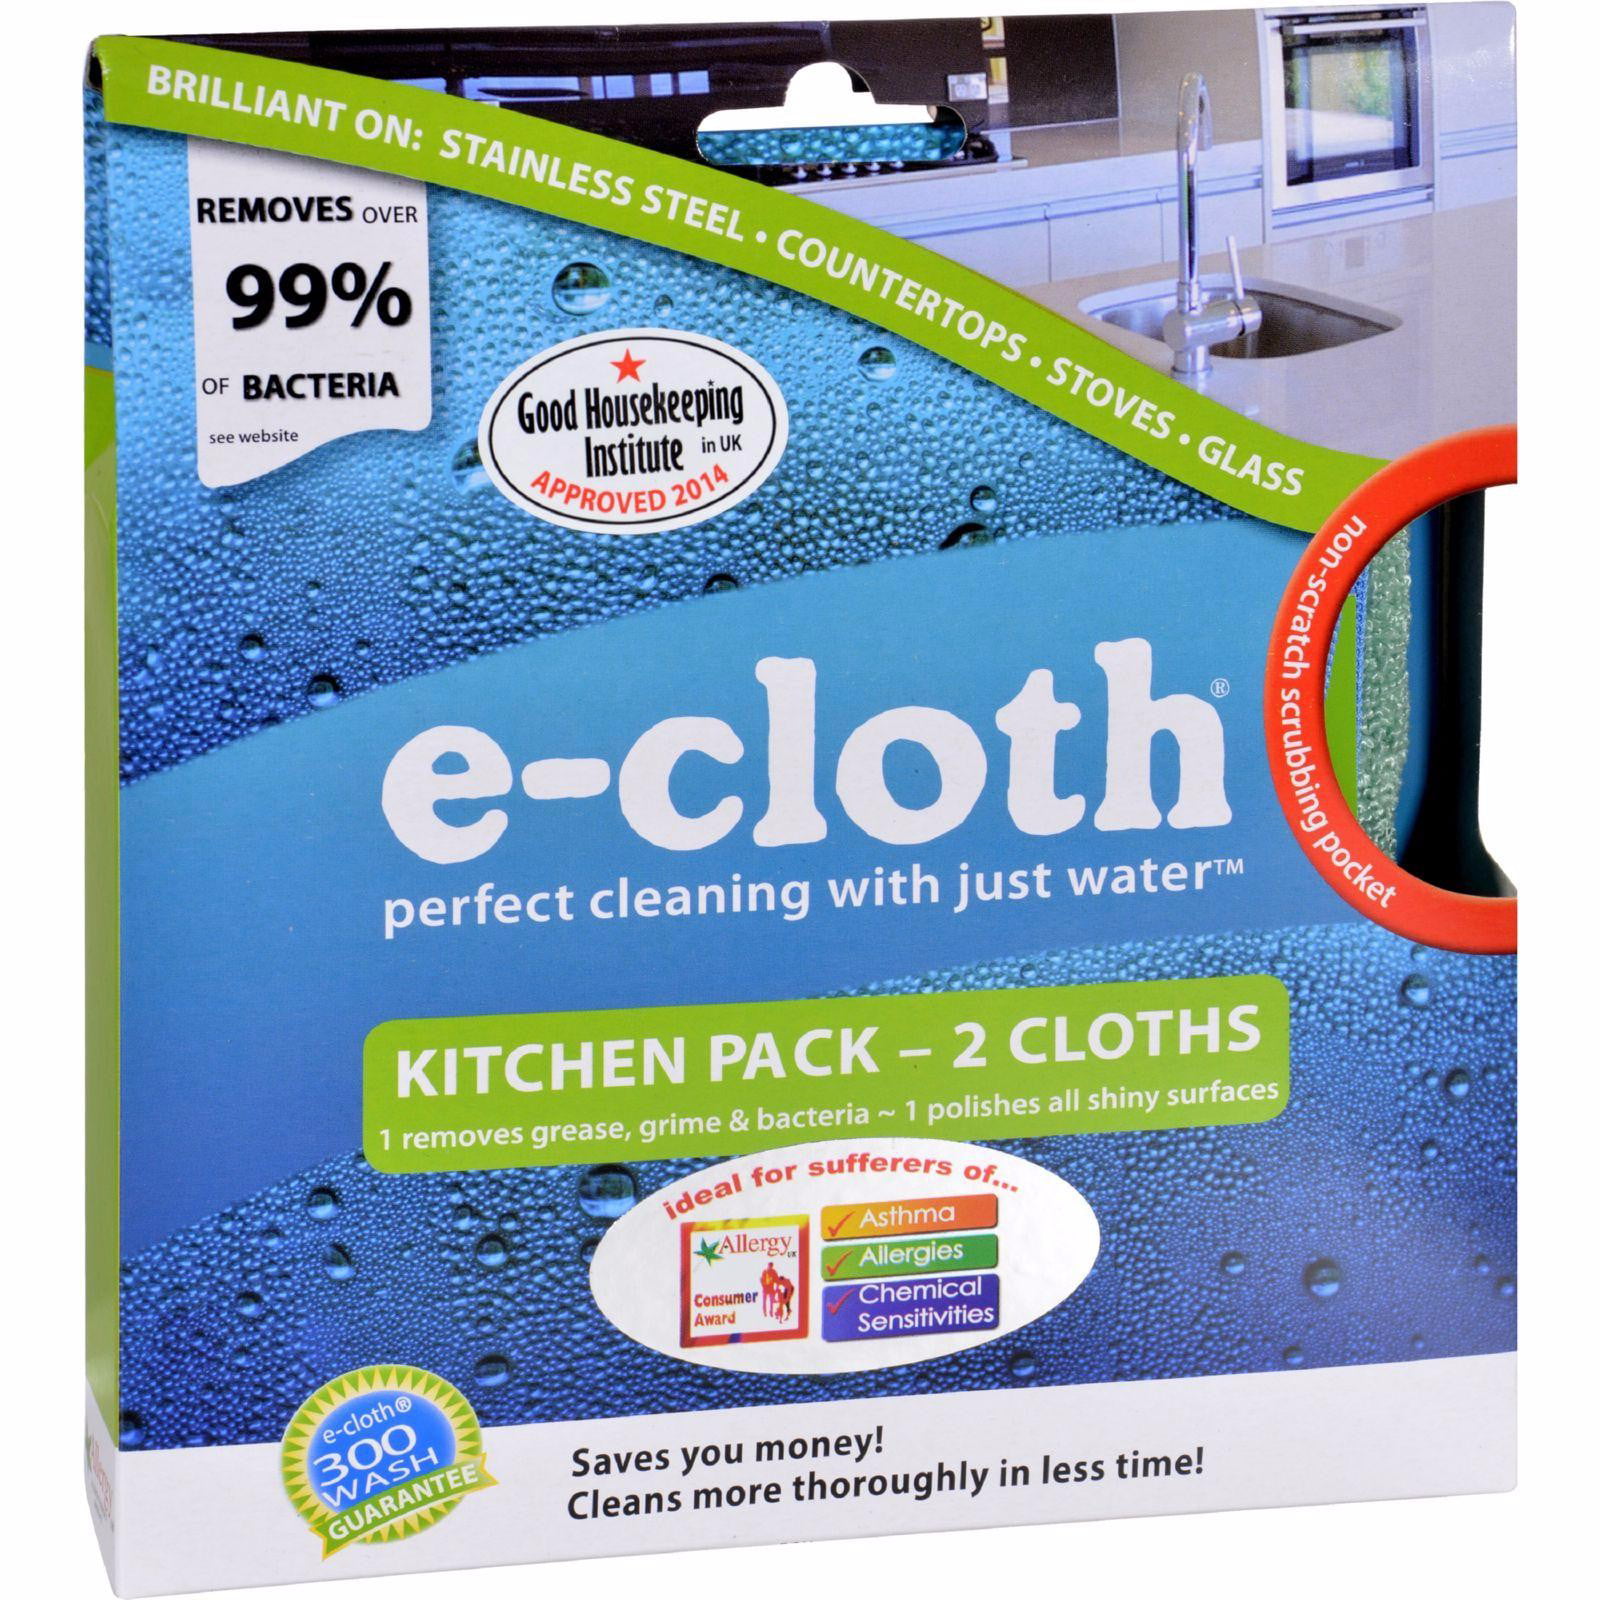 Kitchen Pack Cleaning Cloth Stainless Steel Countertops Removes